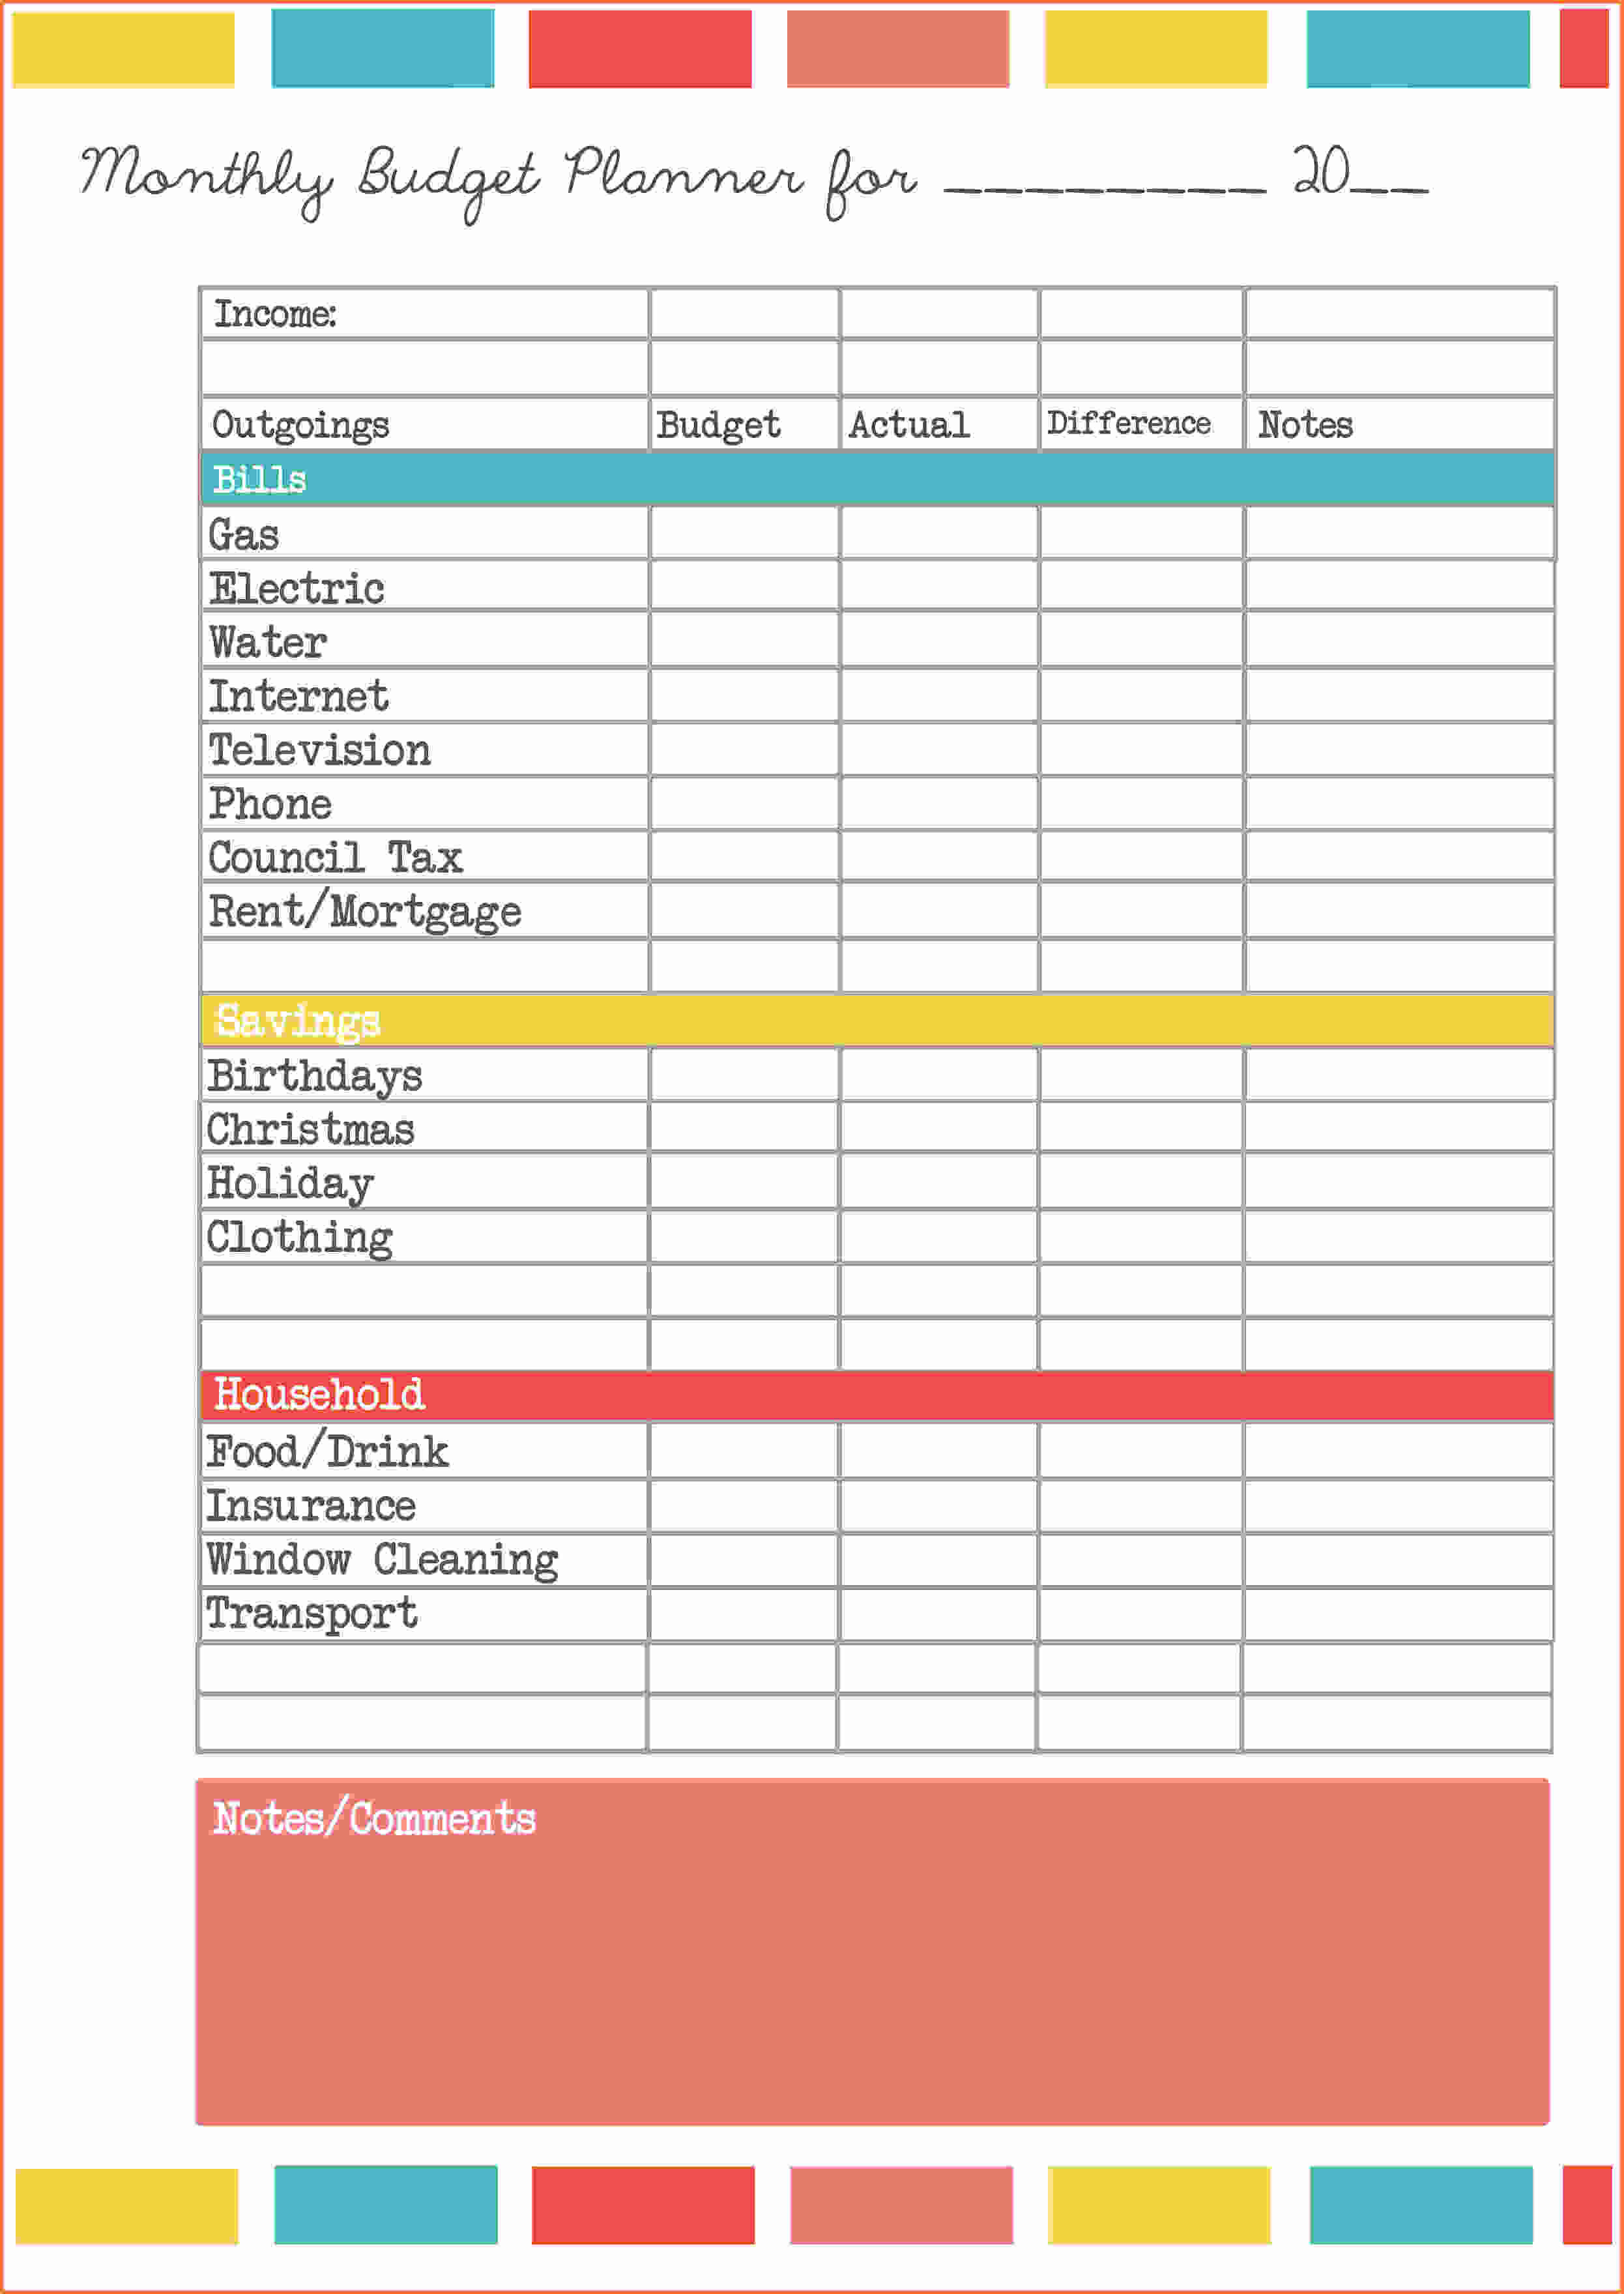 Free Budget Spreadsheet Intended For Budget Planning Spreadsheet 